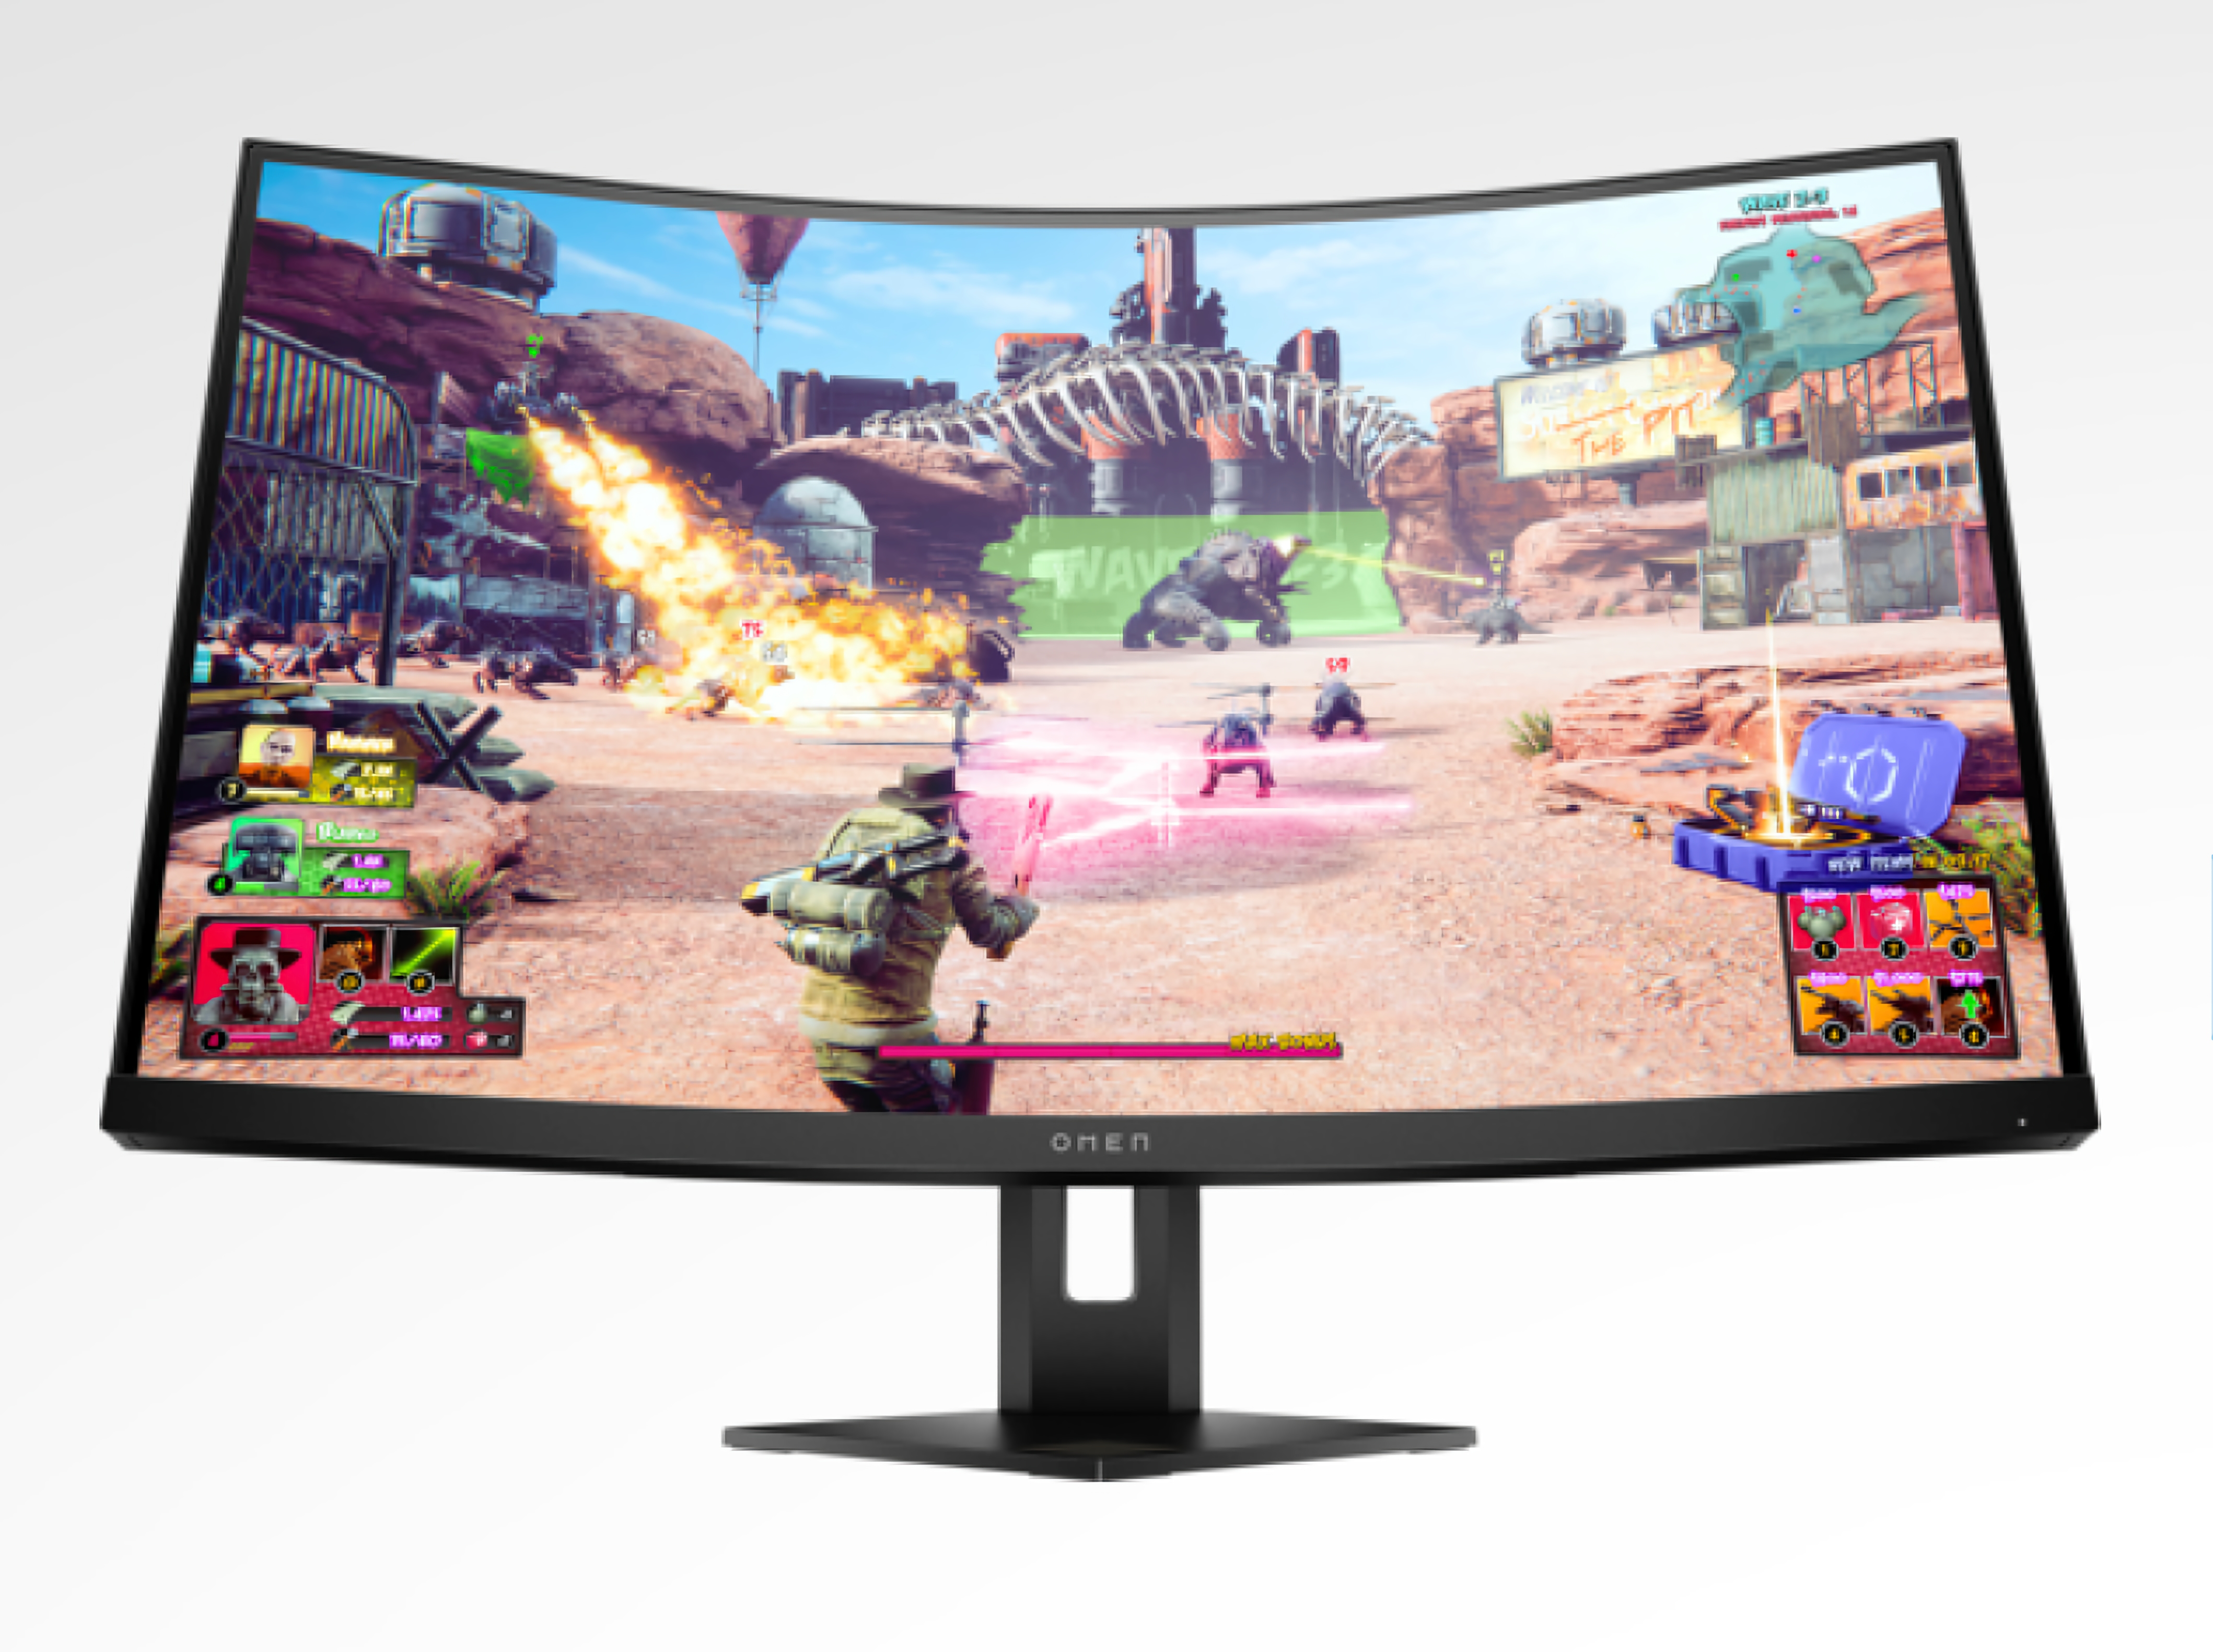 HP unveiled a new gaming monitor with a curved 27-inch 2K screen